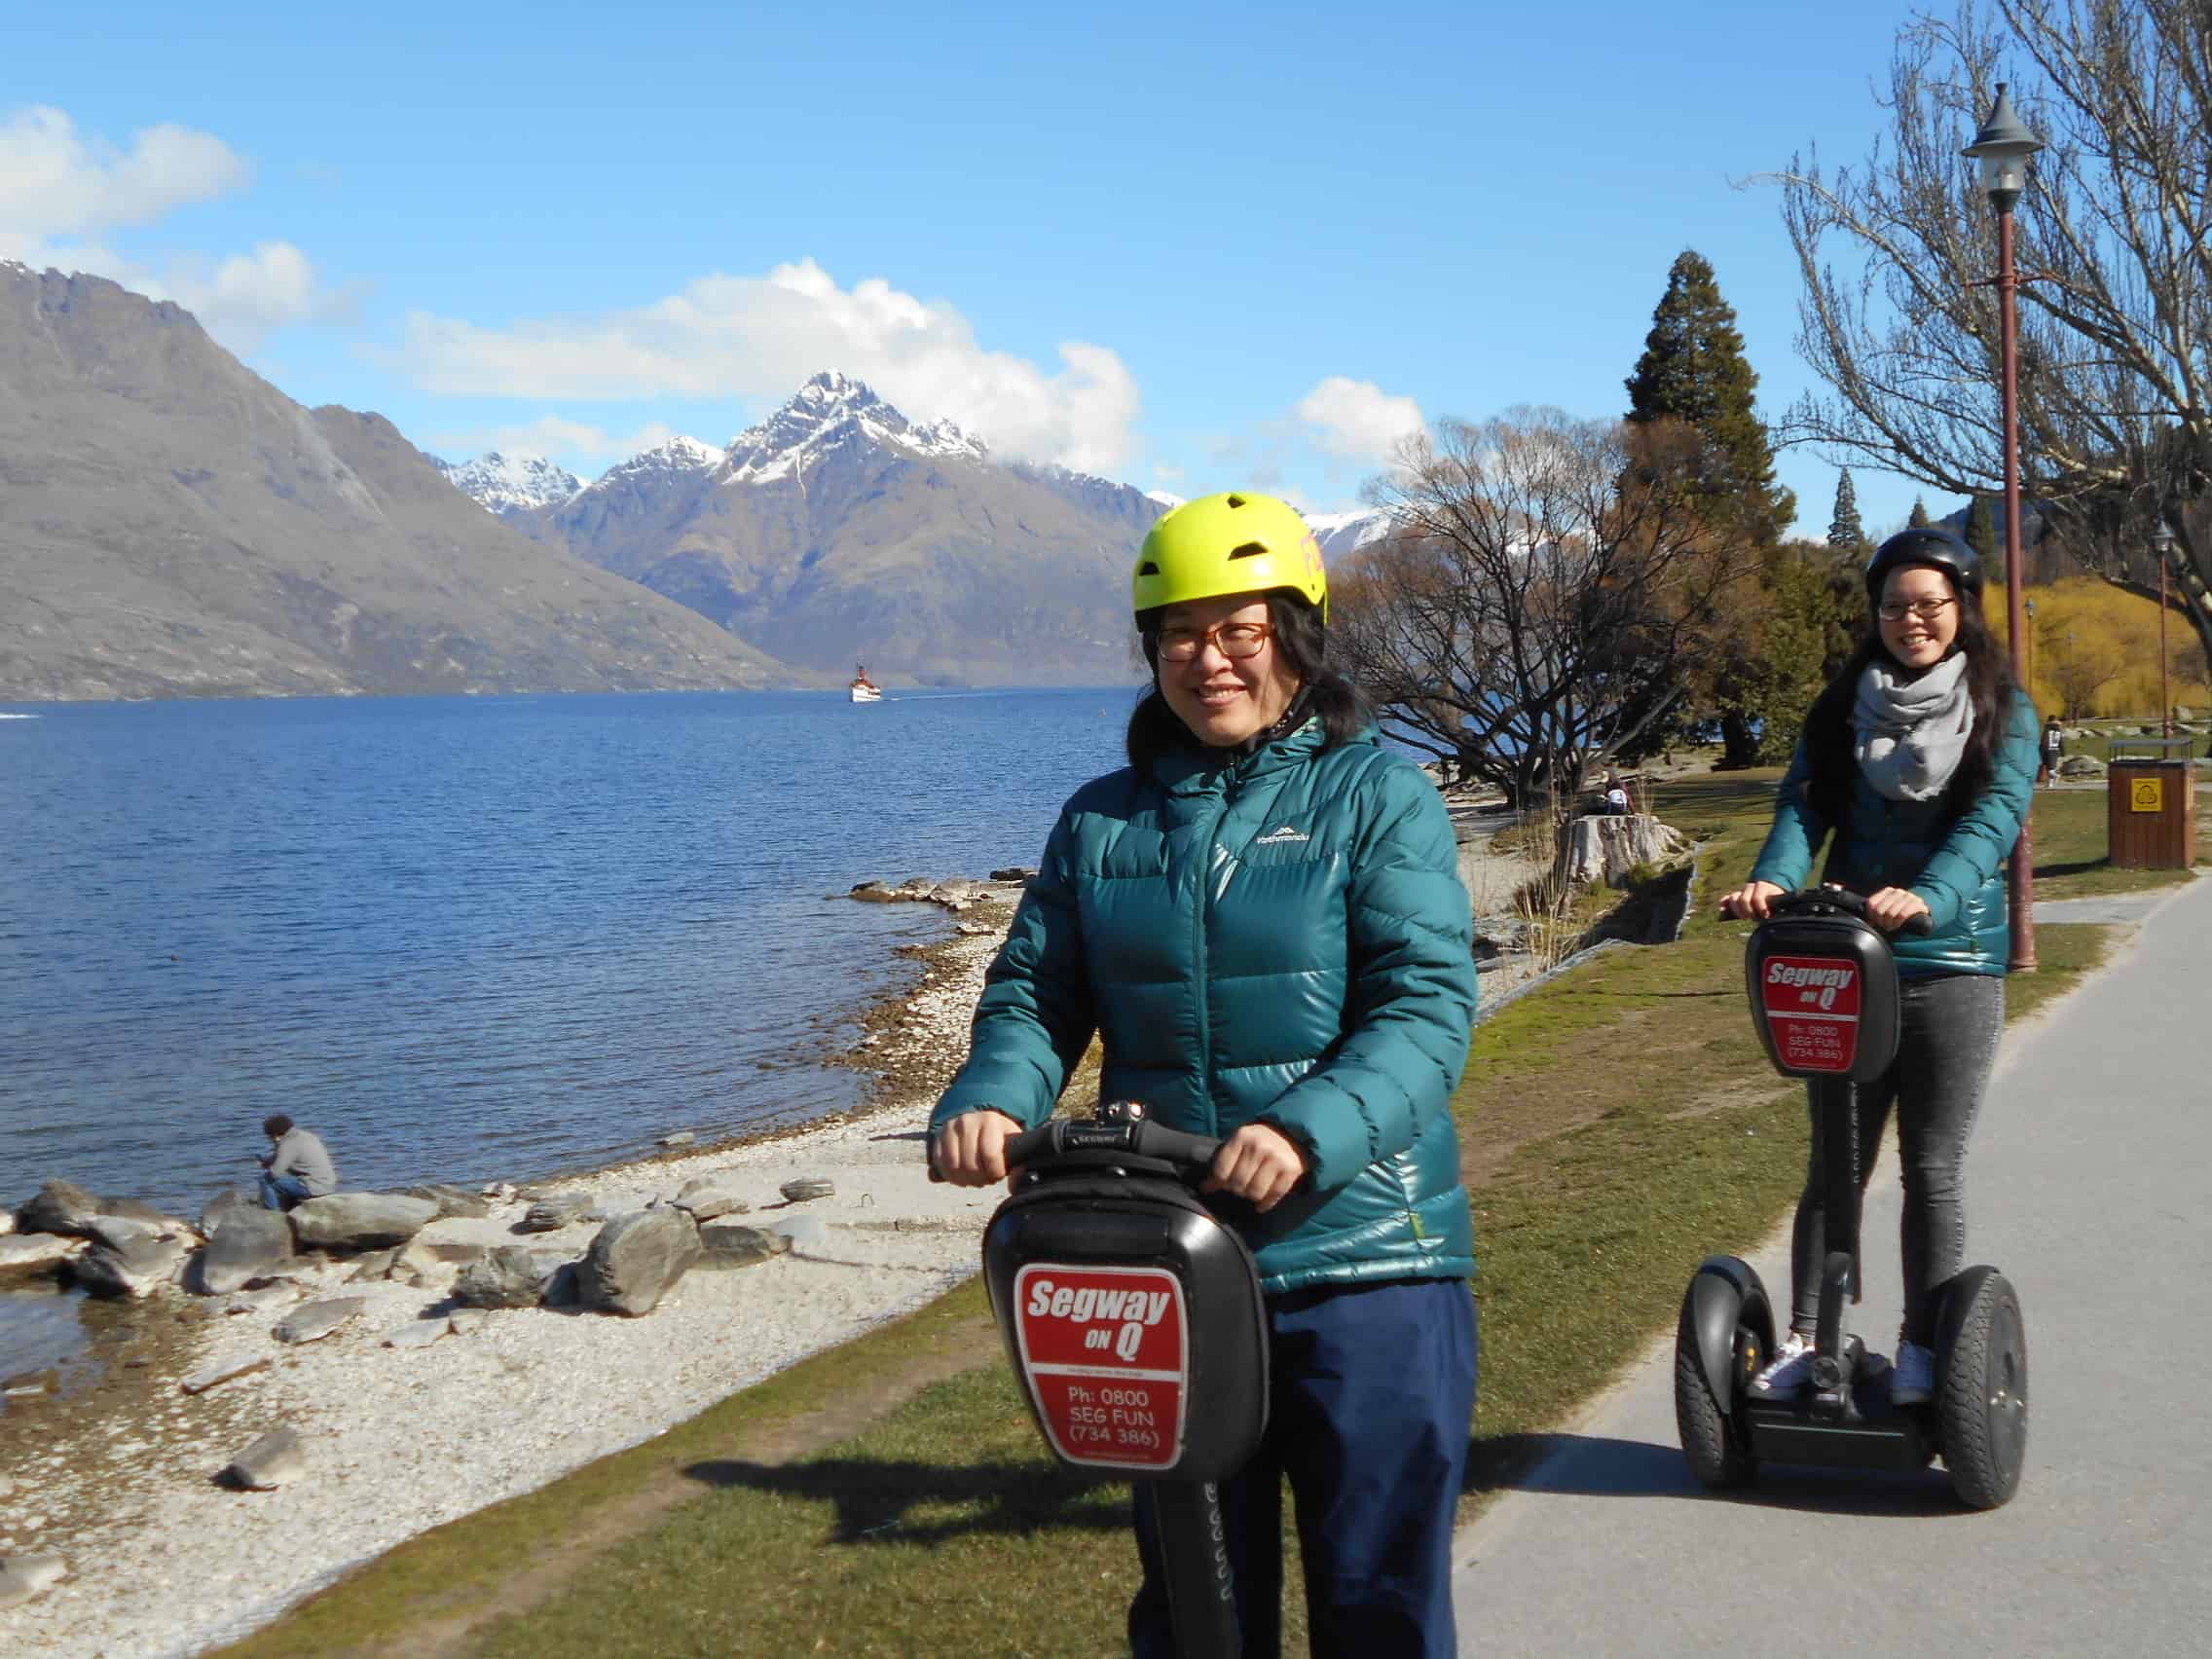 Lakeside Cruising Queenstown Riding an eco-friendly Segway